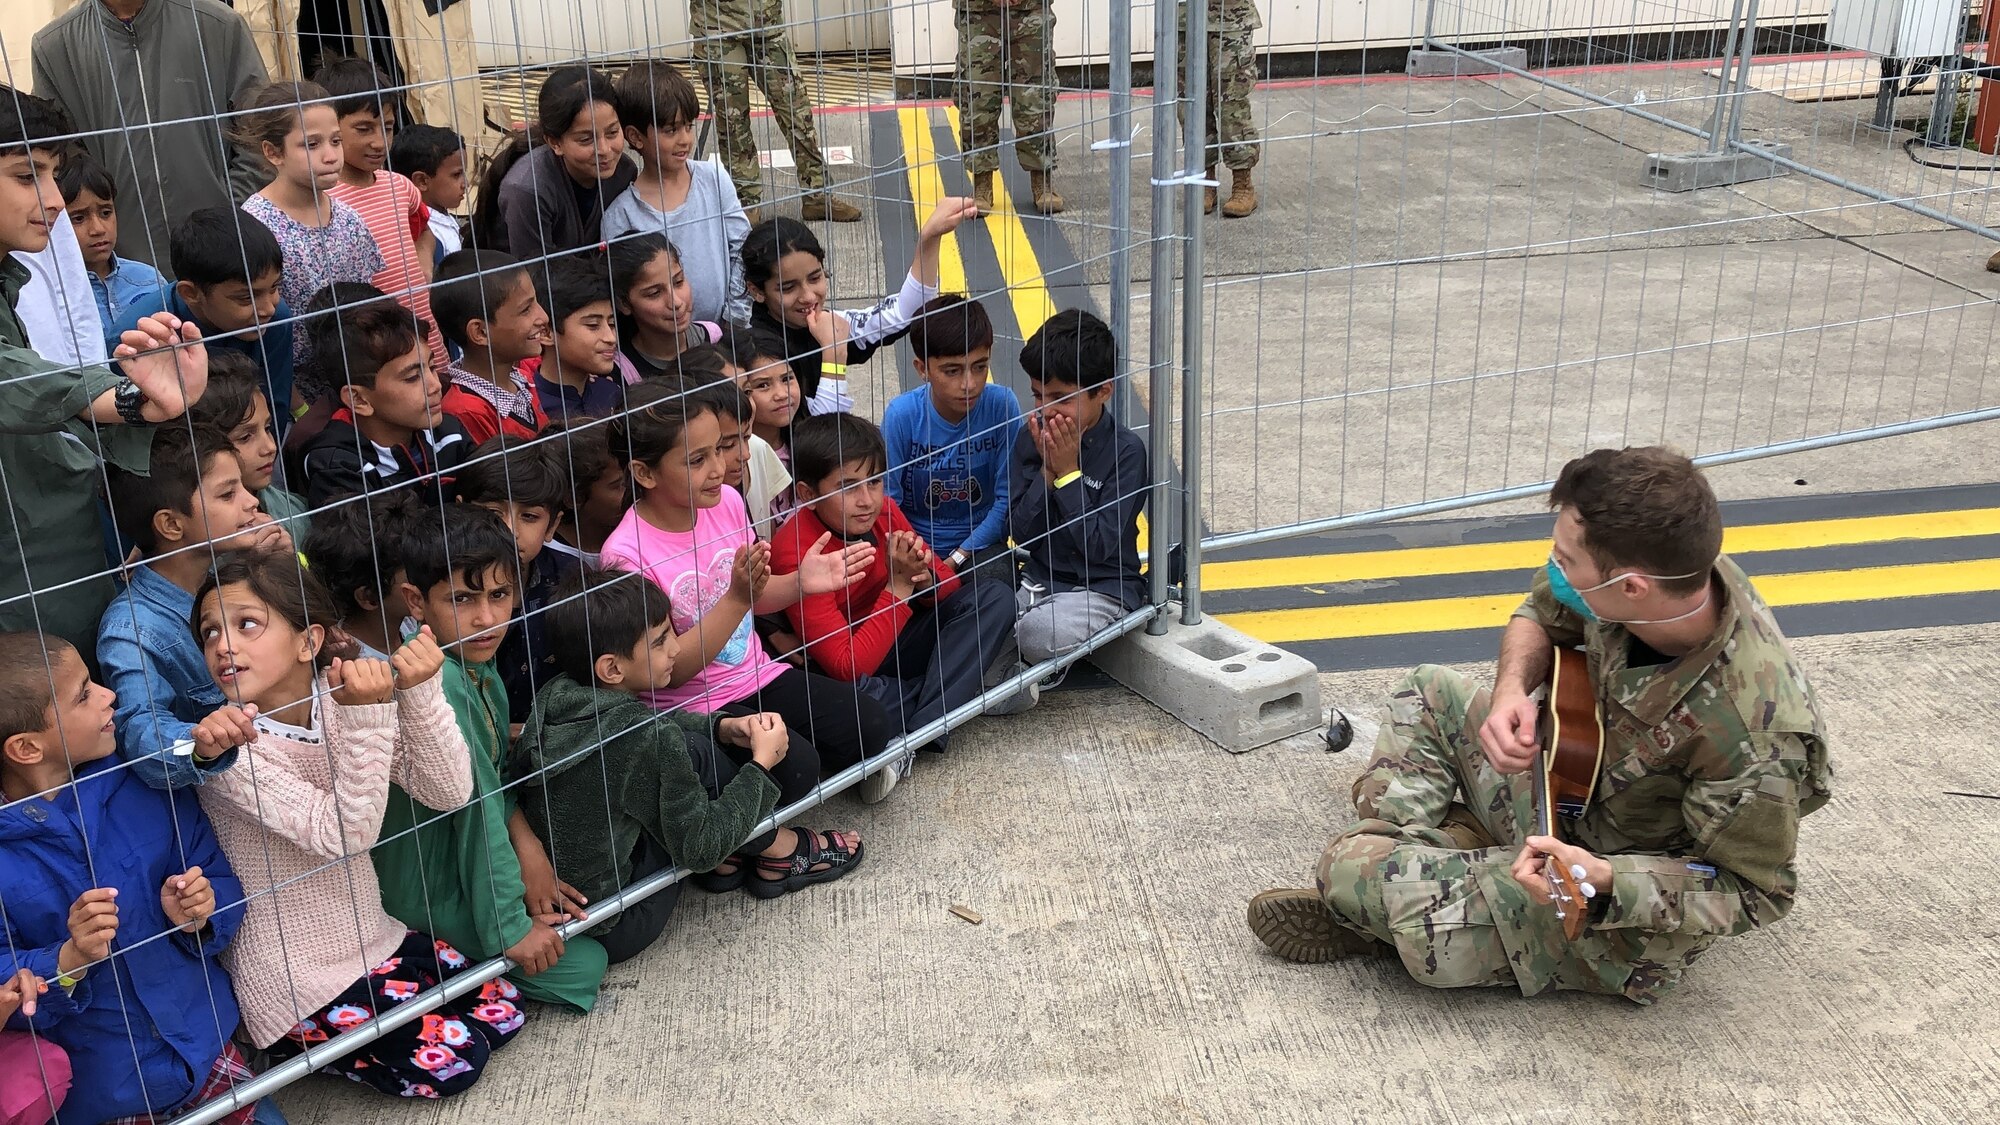 A U.S. Air Force Airman plays the ukulele for children from Afghanistan during Operation Allies Refuge at Ramstein Air Base, Germany, Aug. 24, 2021. Ramstein AB is providing safe, temporary lodging for evacuees. Many service members are also volunteering to raise morale for evacuees as they await transportation to more permanent resettlement locations.